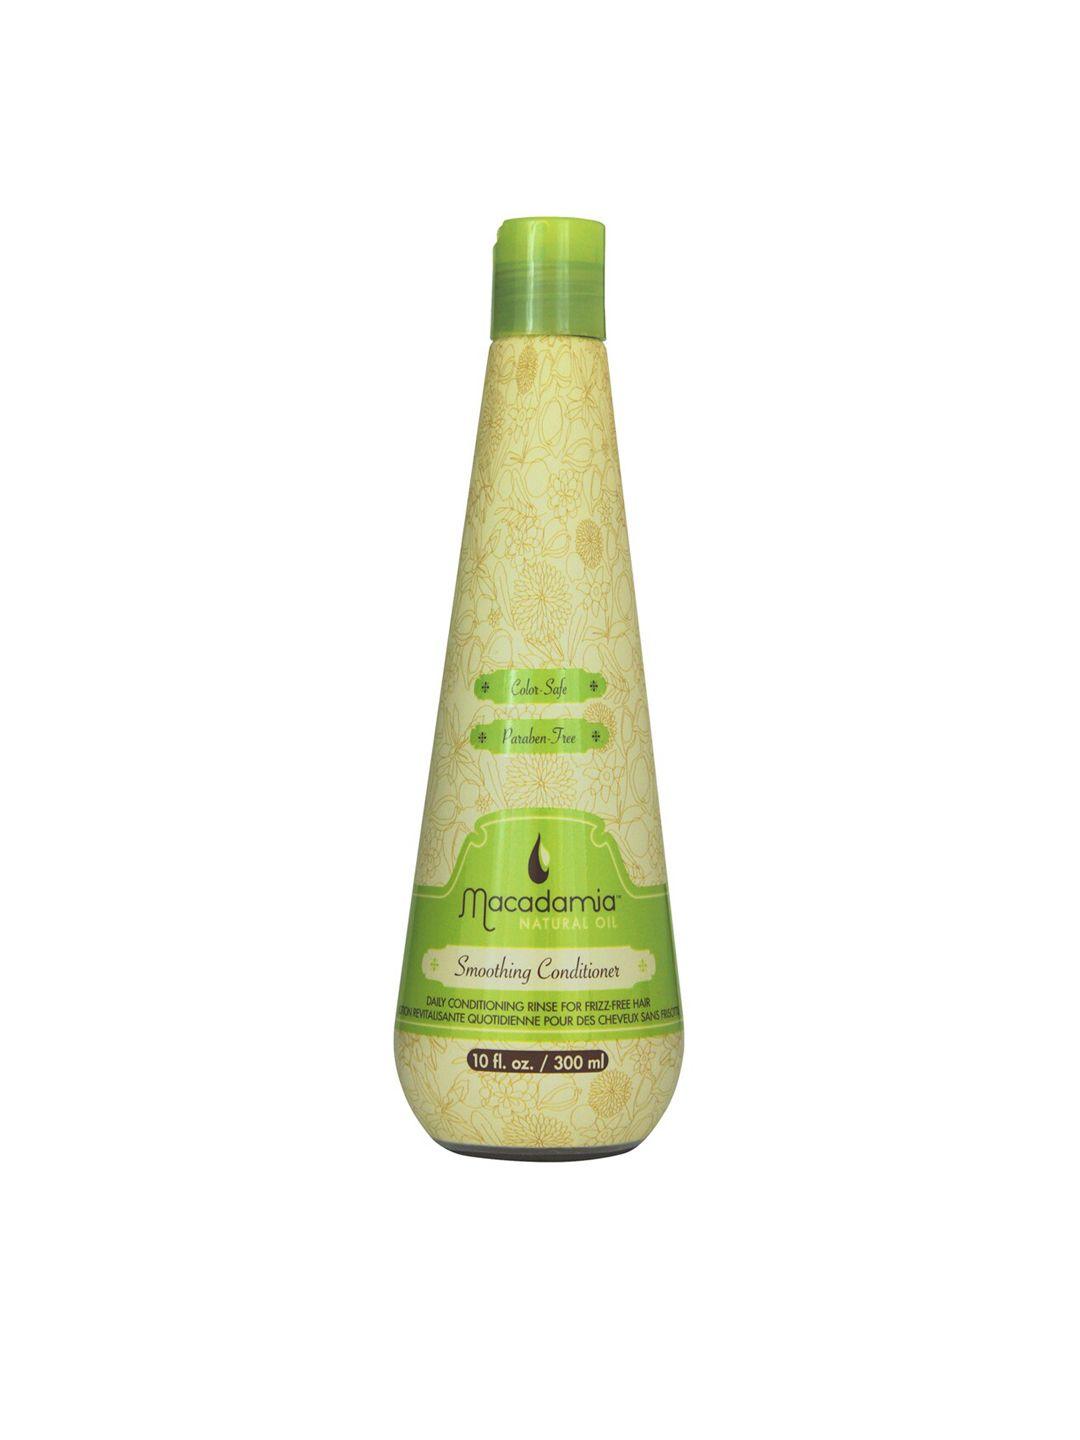 macadamia-natural-oil-smoothing-conditioner-300-ml